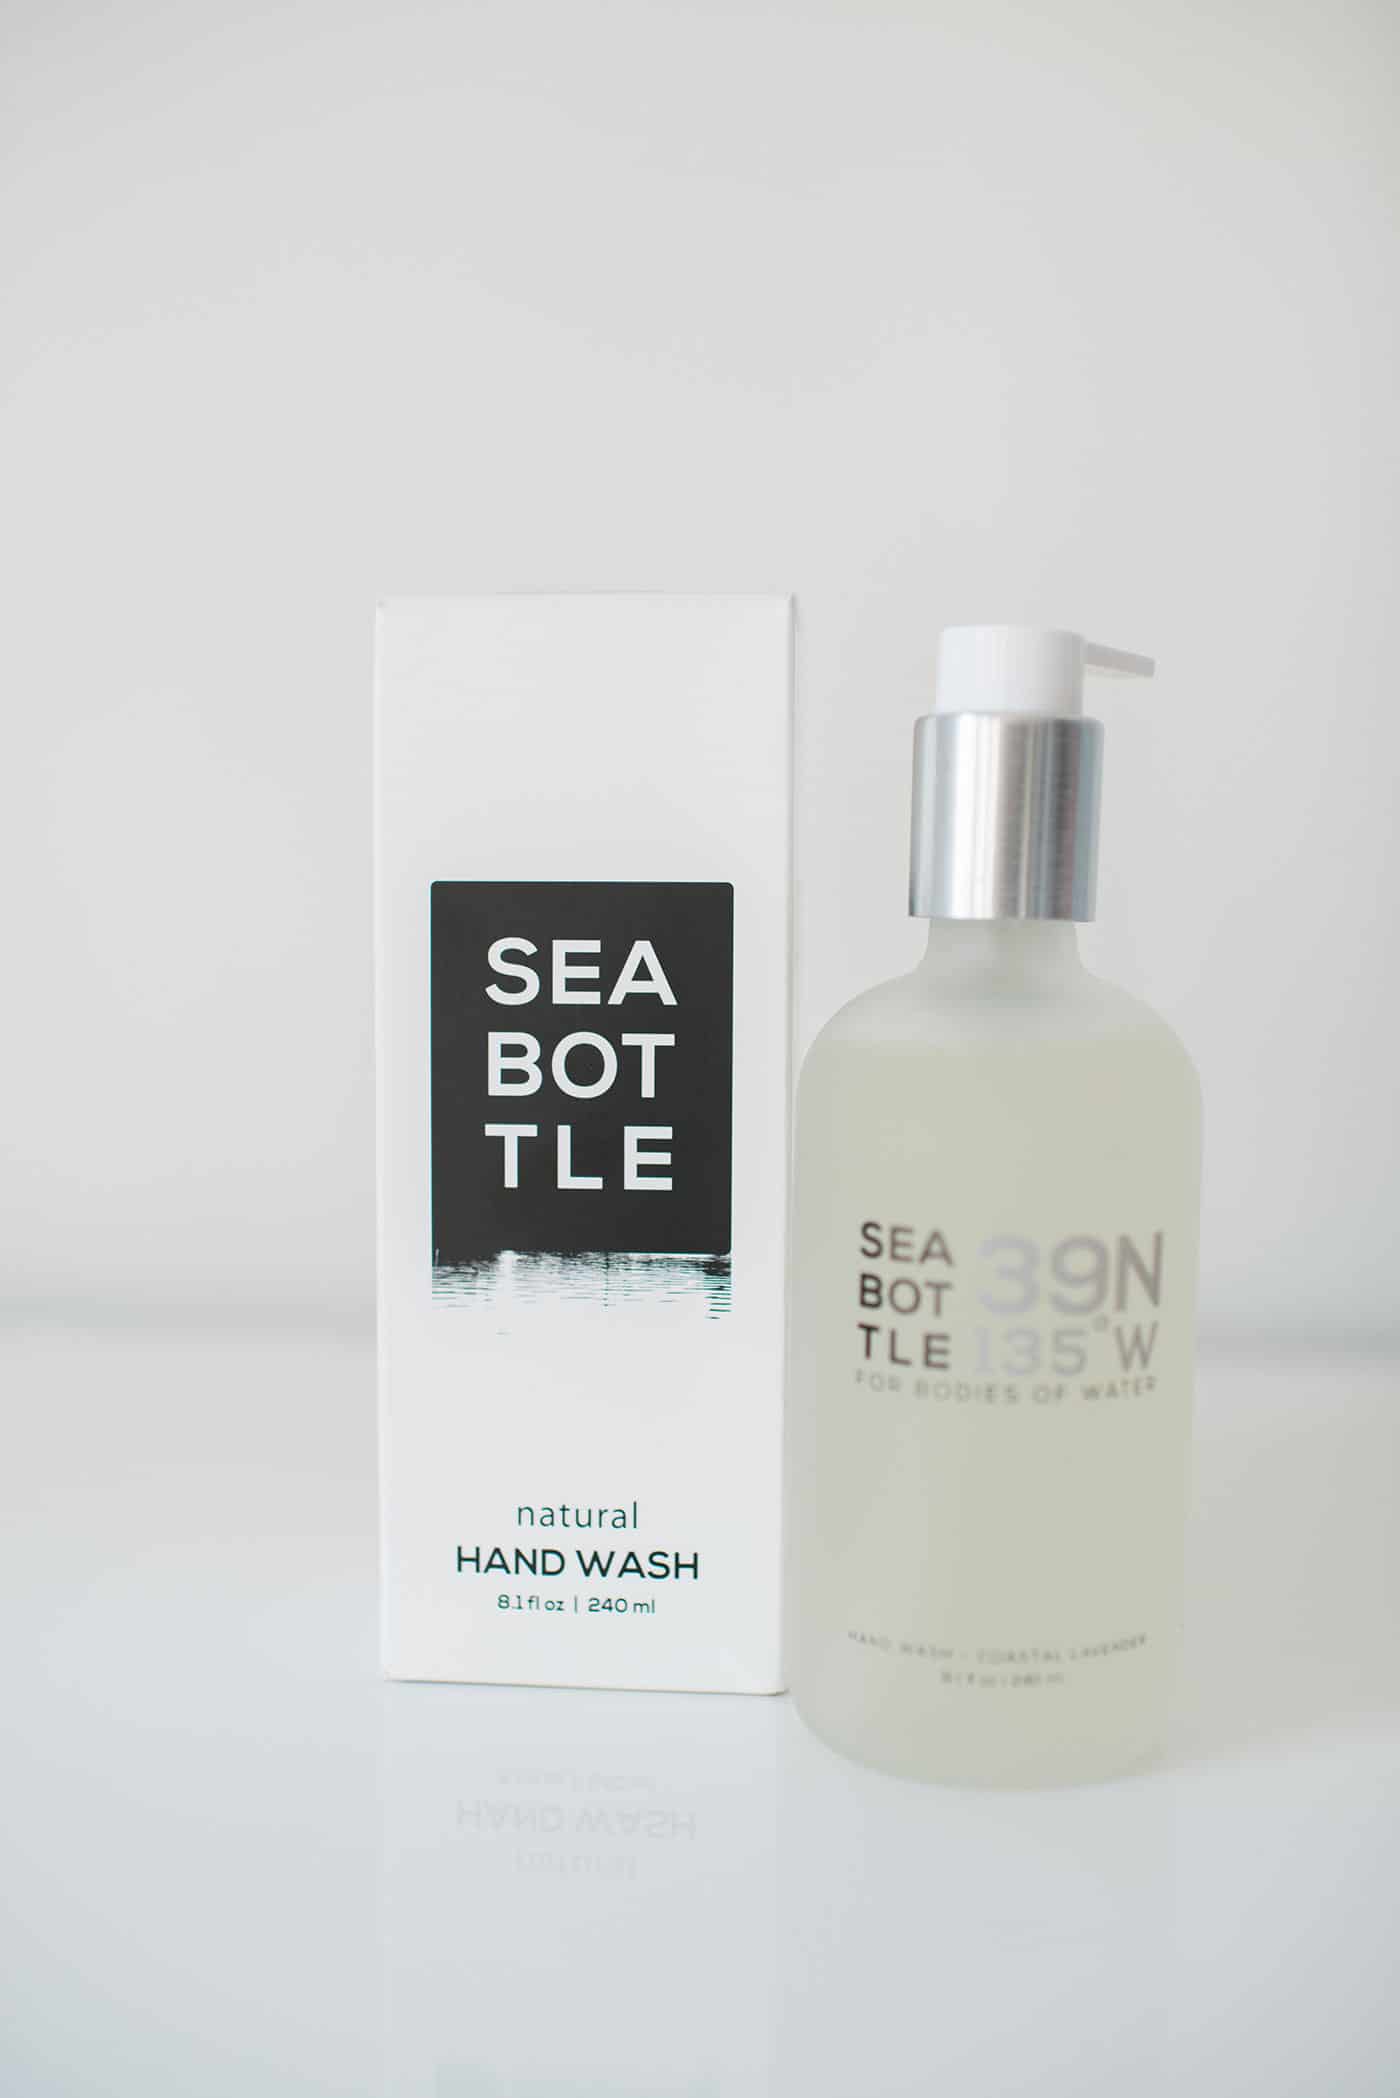 Tiffani Thiessen's Holiday Gift Guide 2016: For the homebody : Sea Bottle hand wash 